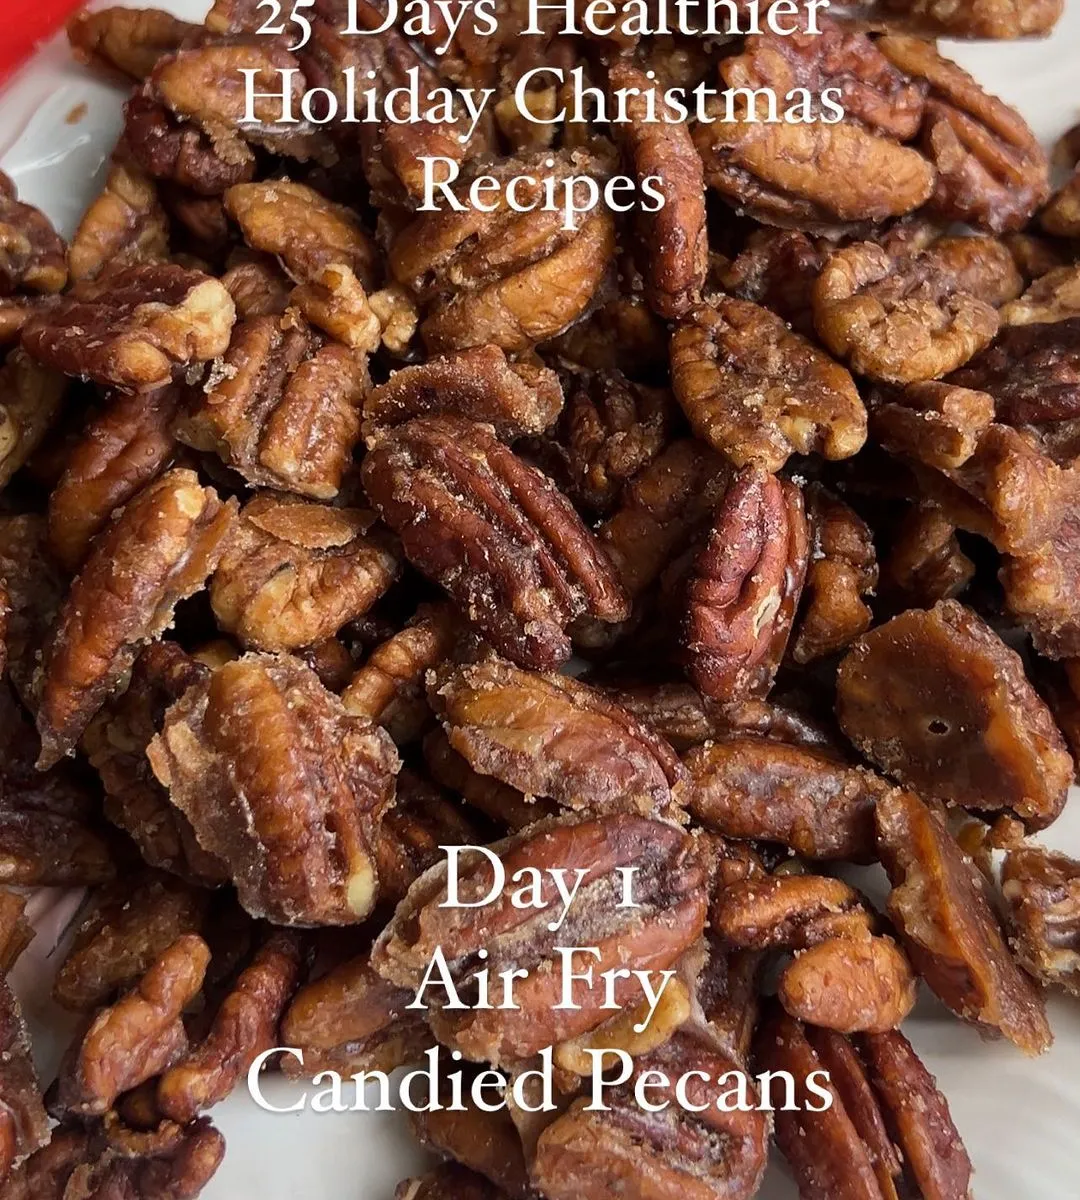 AIR FRY CANDIED PECANS